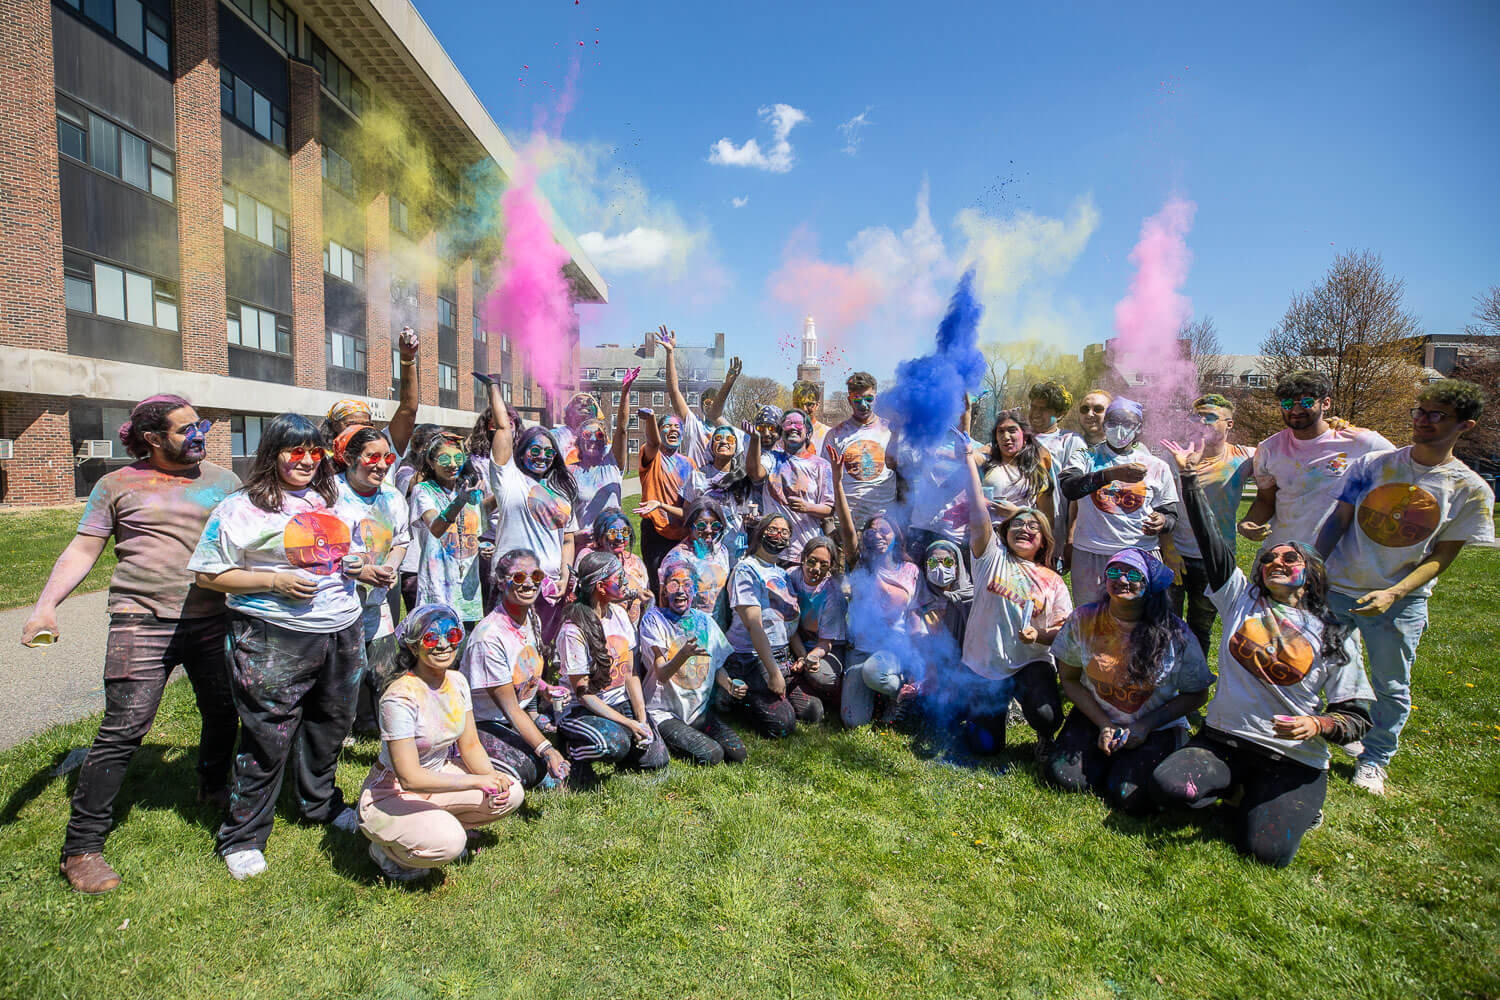 Members of student government covered in bright pigments celebrate the Hindu festival of Holi that marks the arrival of spring. During Holi participants cover each other in rainbow colors, each of which has a special meaning.